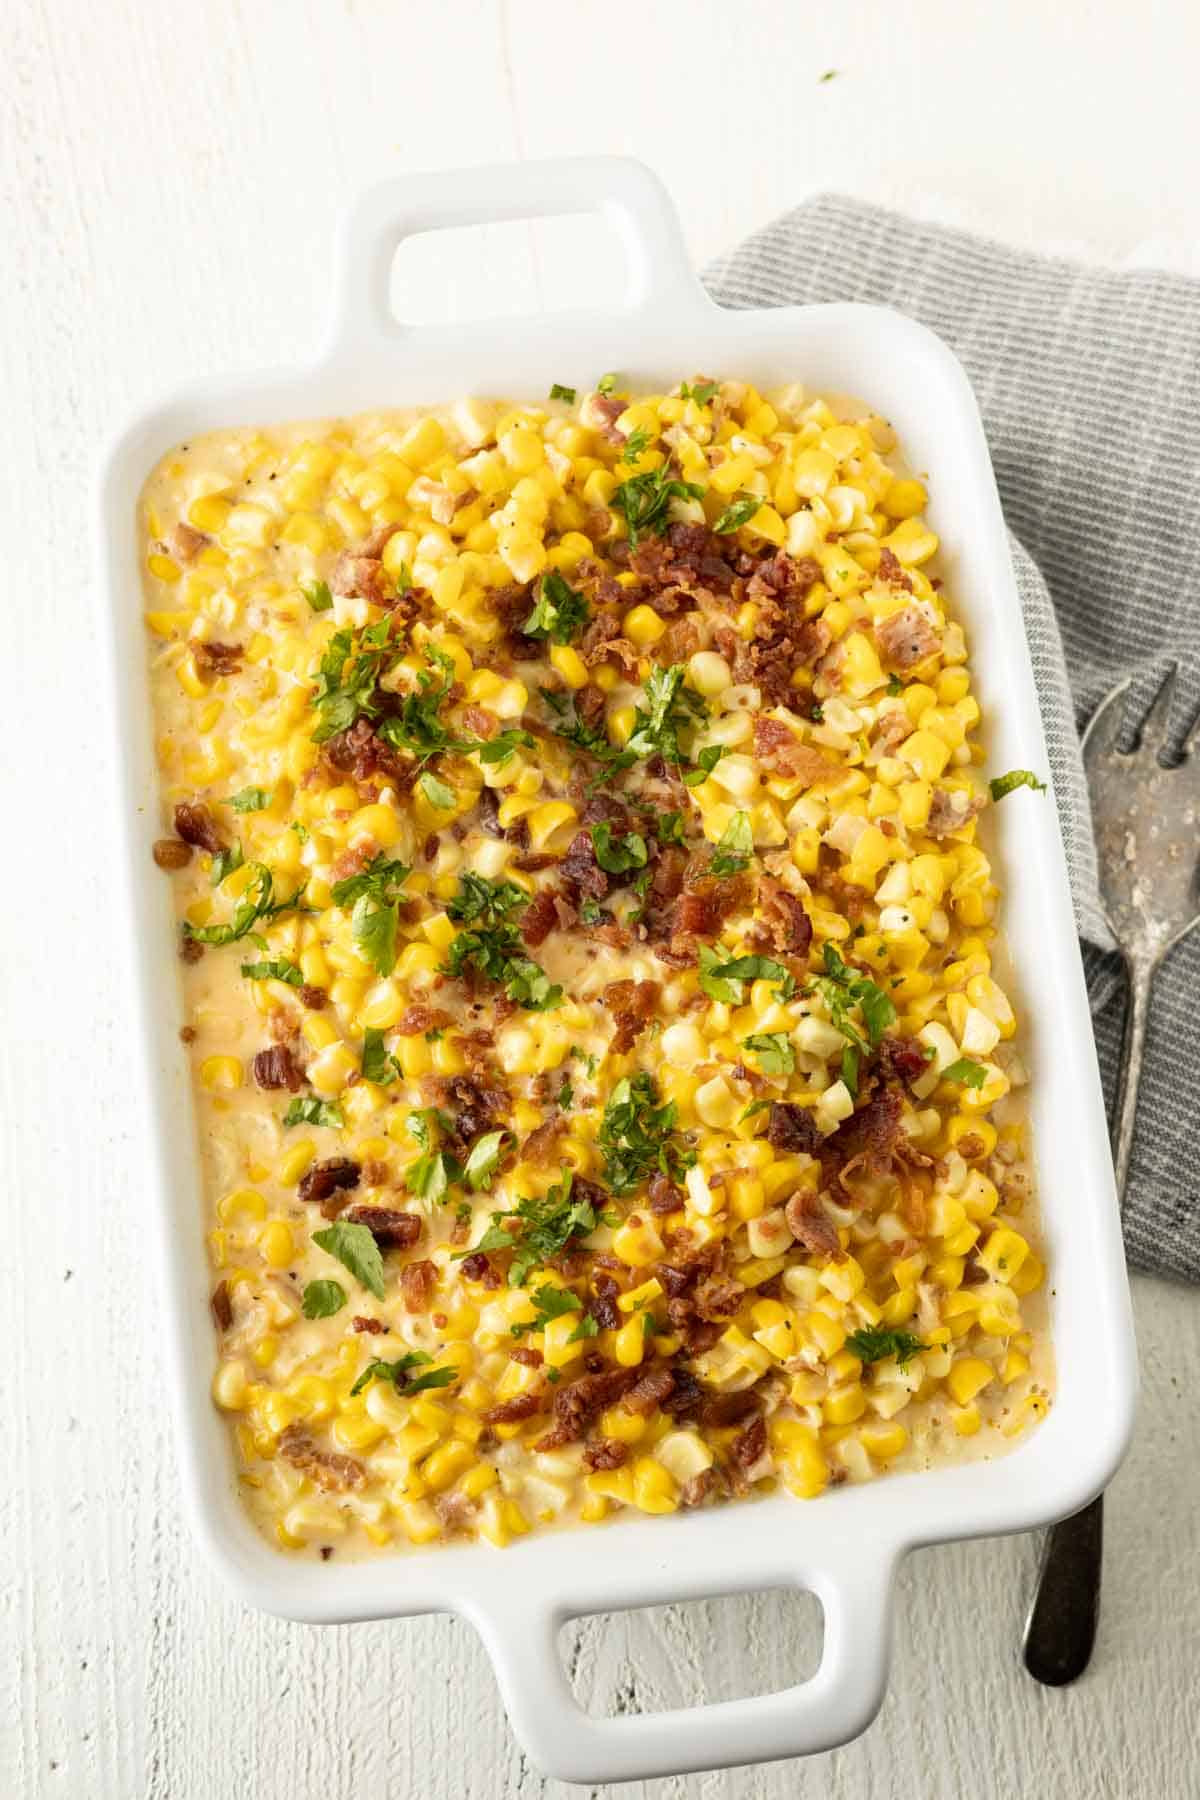 Corn casserole with cheese in a white baking dish.